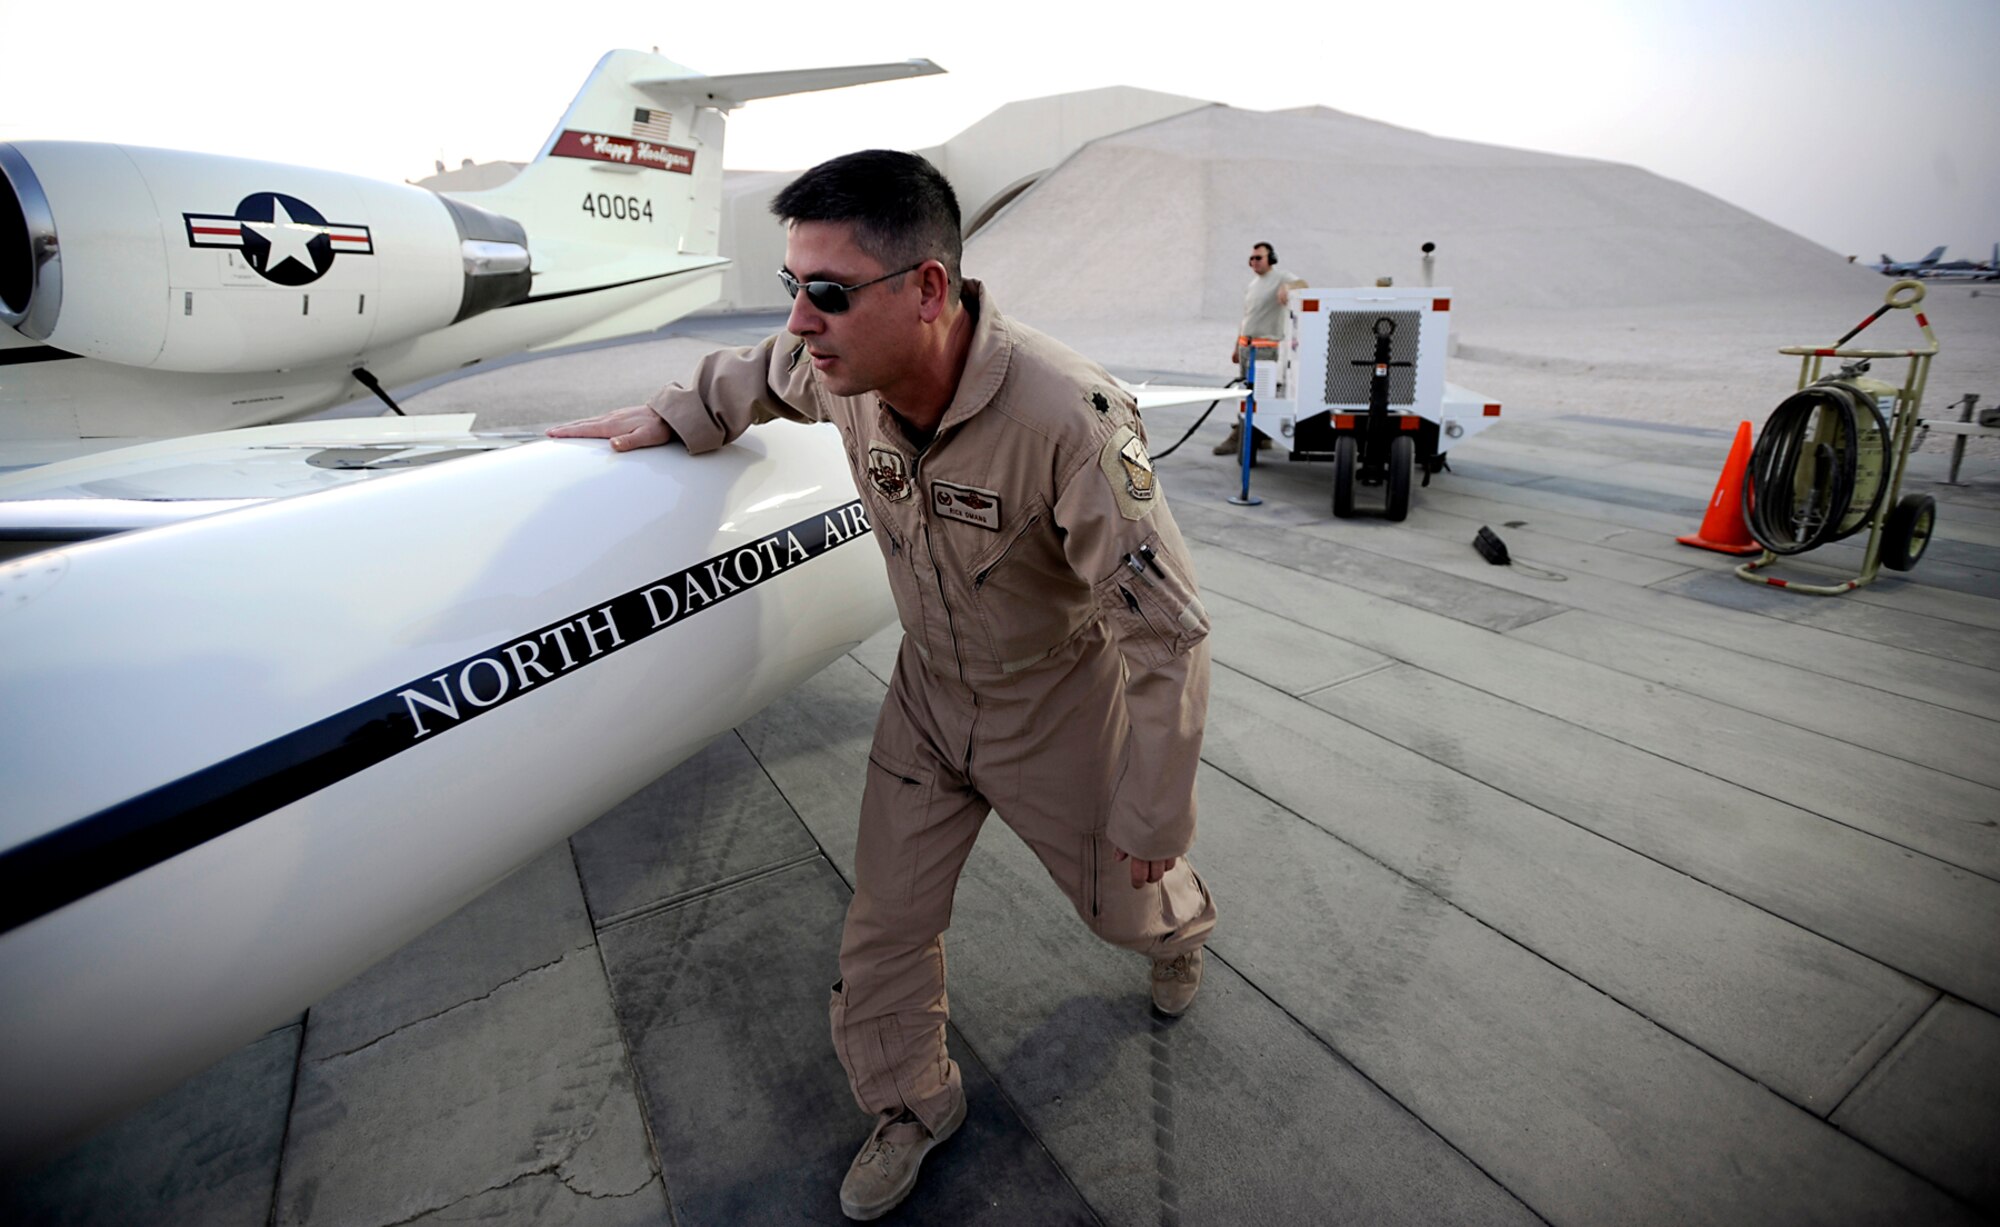 Lt. Col. Rick Omang, a C-21 pilot assigned to the 379th Expeditionary Operations Group, conducts a pre-flight inspection prior to conducting combat operations over Southwest Asia July 26. The C-21 is a twin turbofan engine aircraft used for cargo and passenger airlift. Colonel Omang is deployed from the 177th Airlift Squadron, North Dakota Air National Guard. (U.S. Air Force photo by Staff Sgt. Shawn Weismiller)